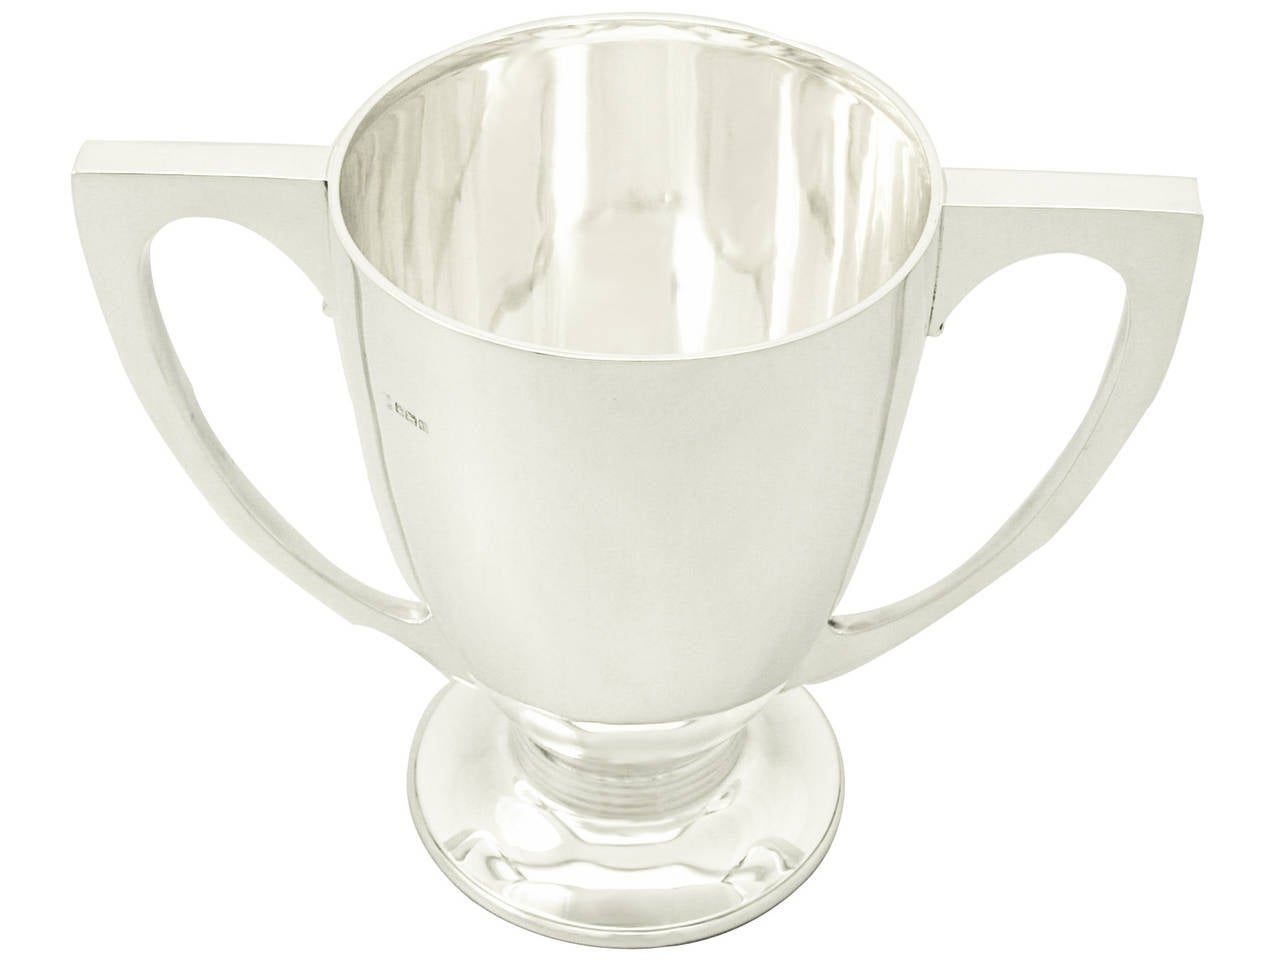 A fine and impressive antique George V English sterling silver presentation trophy in the Art Deco style; part of our presentation silverware collection

This fine antique George V sterling silver presentation cup has a circular plain bell shaped